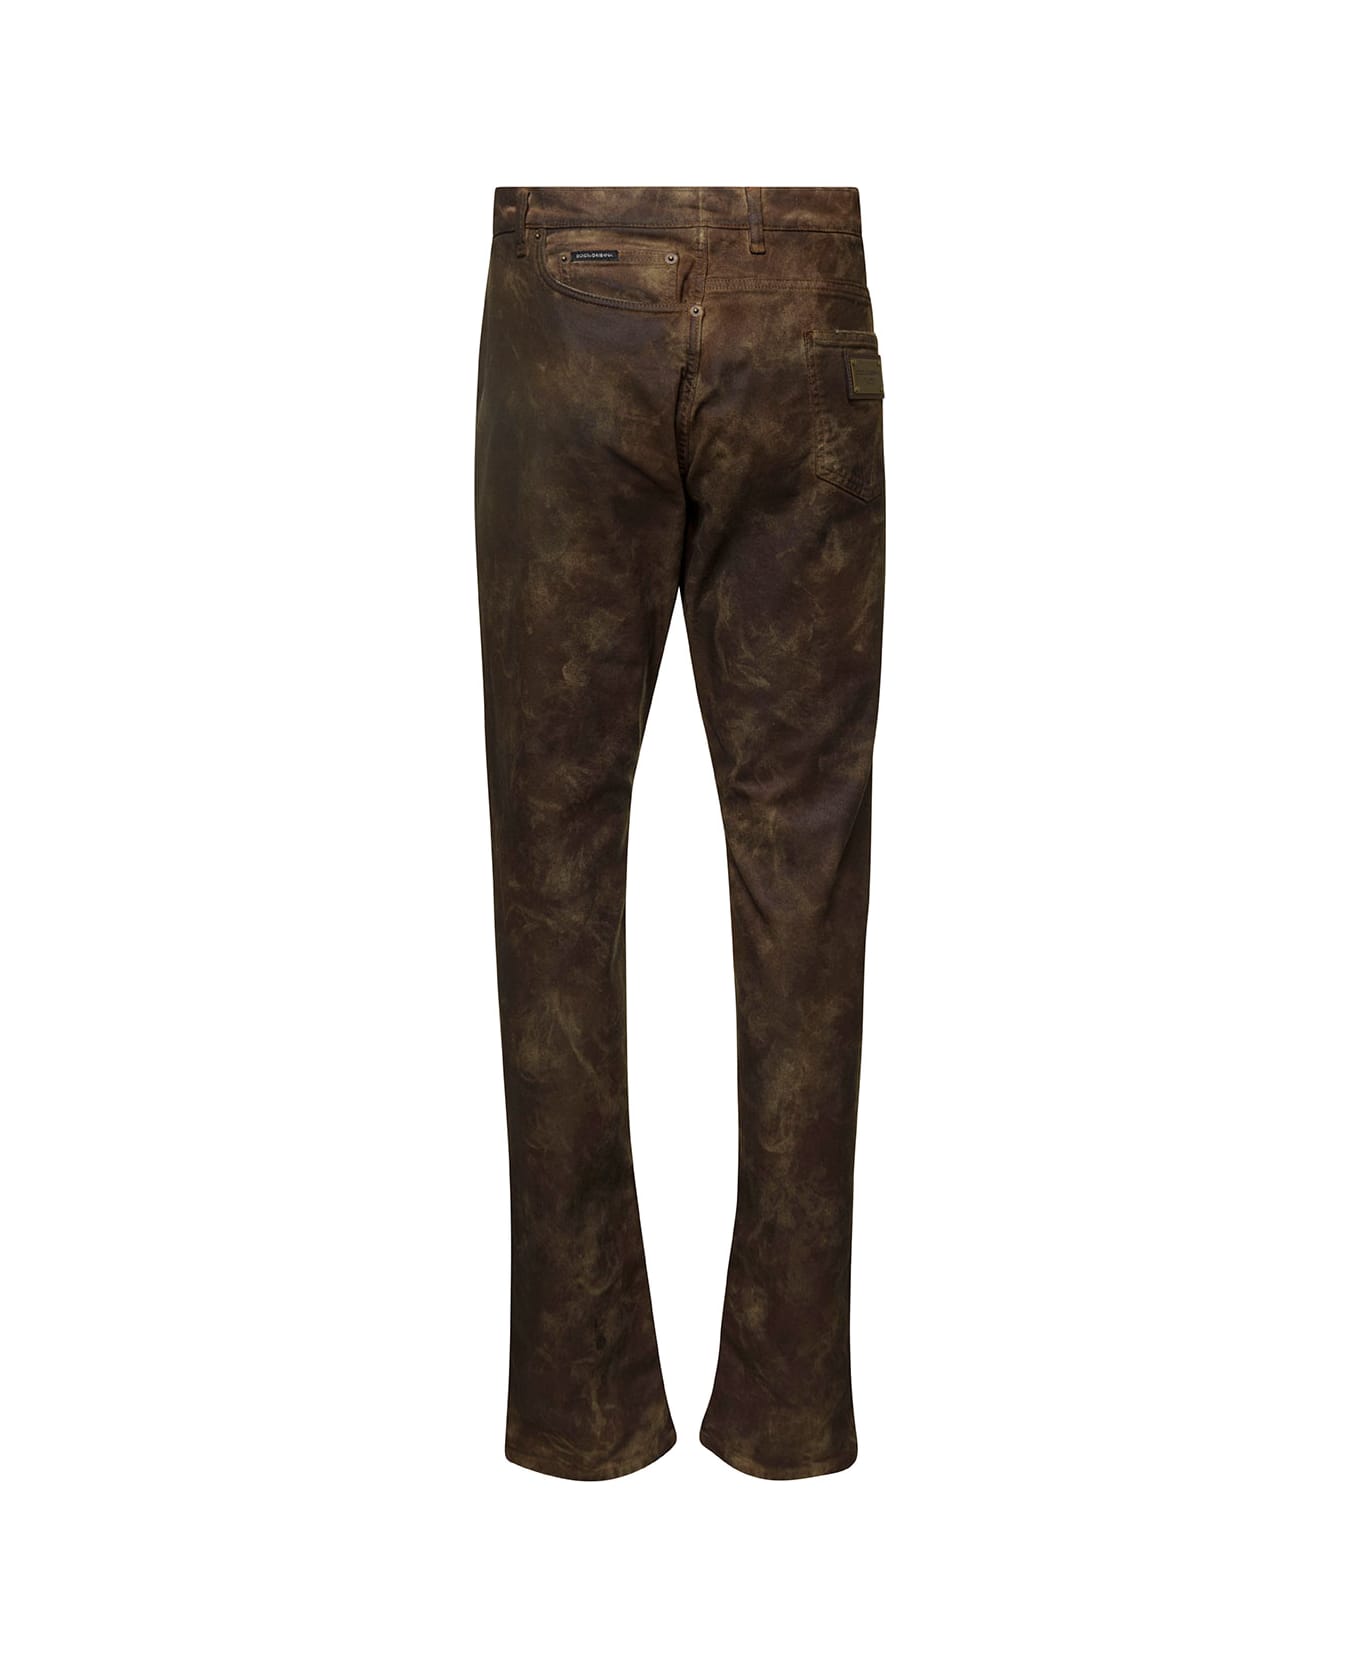 Dolce & Gabbana Brown Fitted Jeans With Ripped Details In Cotton Denim Man - Brown